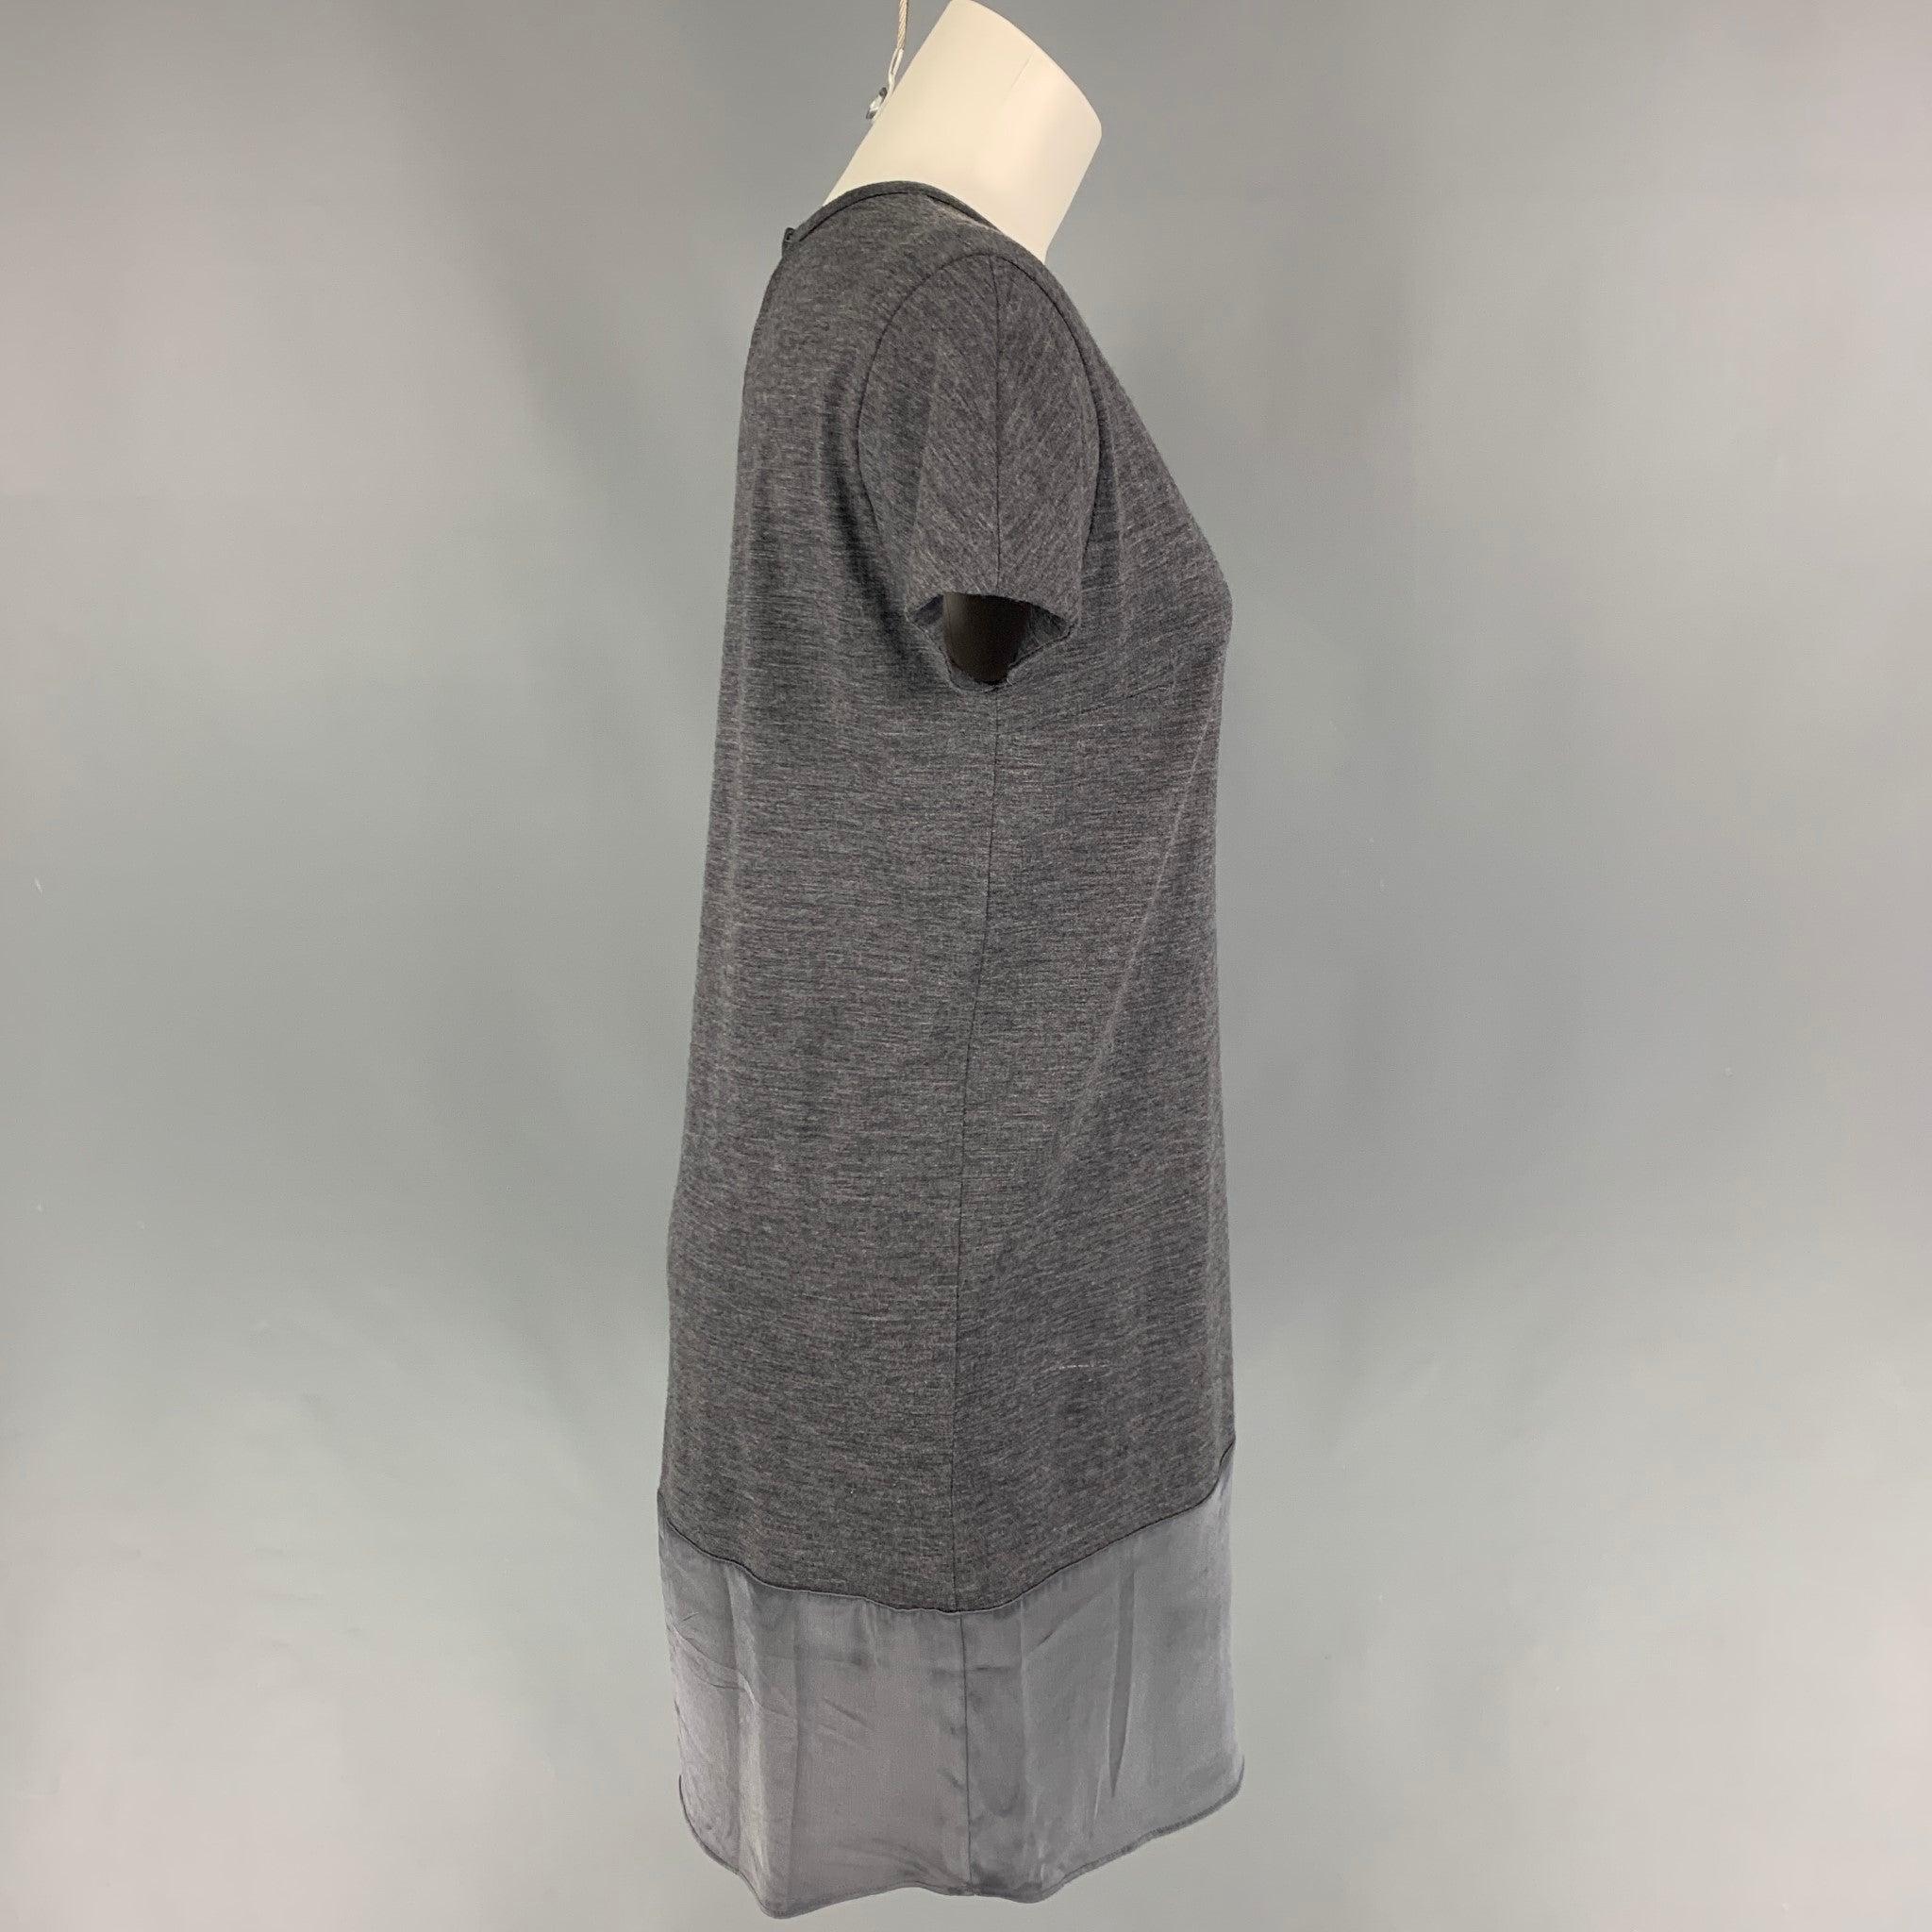 BRUNELLO CUCINELLI dress comes in a grey wool featuring a shift style, short sleeves, and a satin panel. Made in Italy.
Very Good
Pre-Owned Condition. 

Marked:   M  

Measurements: 
 
Shoulder: 16.5 inches  Bust: 38 inches Hip: 38 inches  Sleeve: